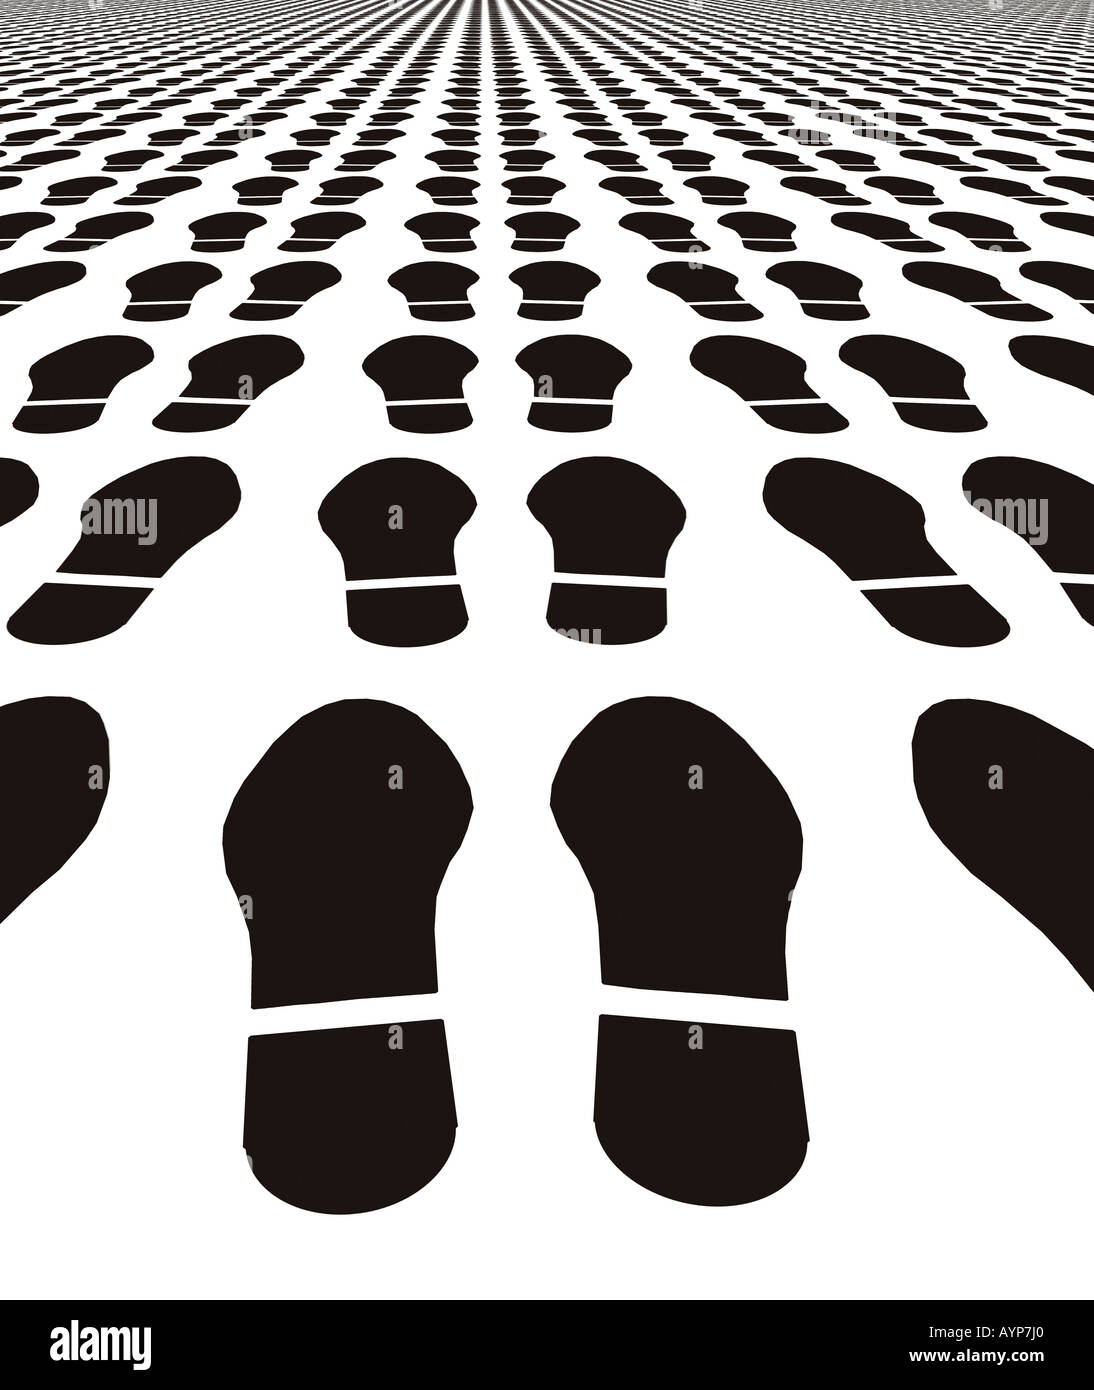 multiple shoe prints in silhouette tiled in converging pattern Stock Photo